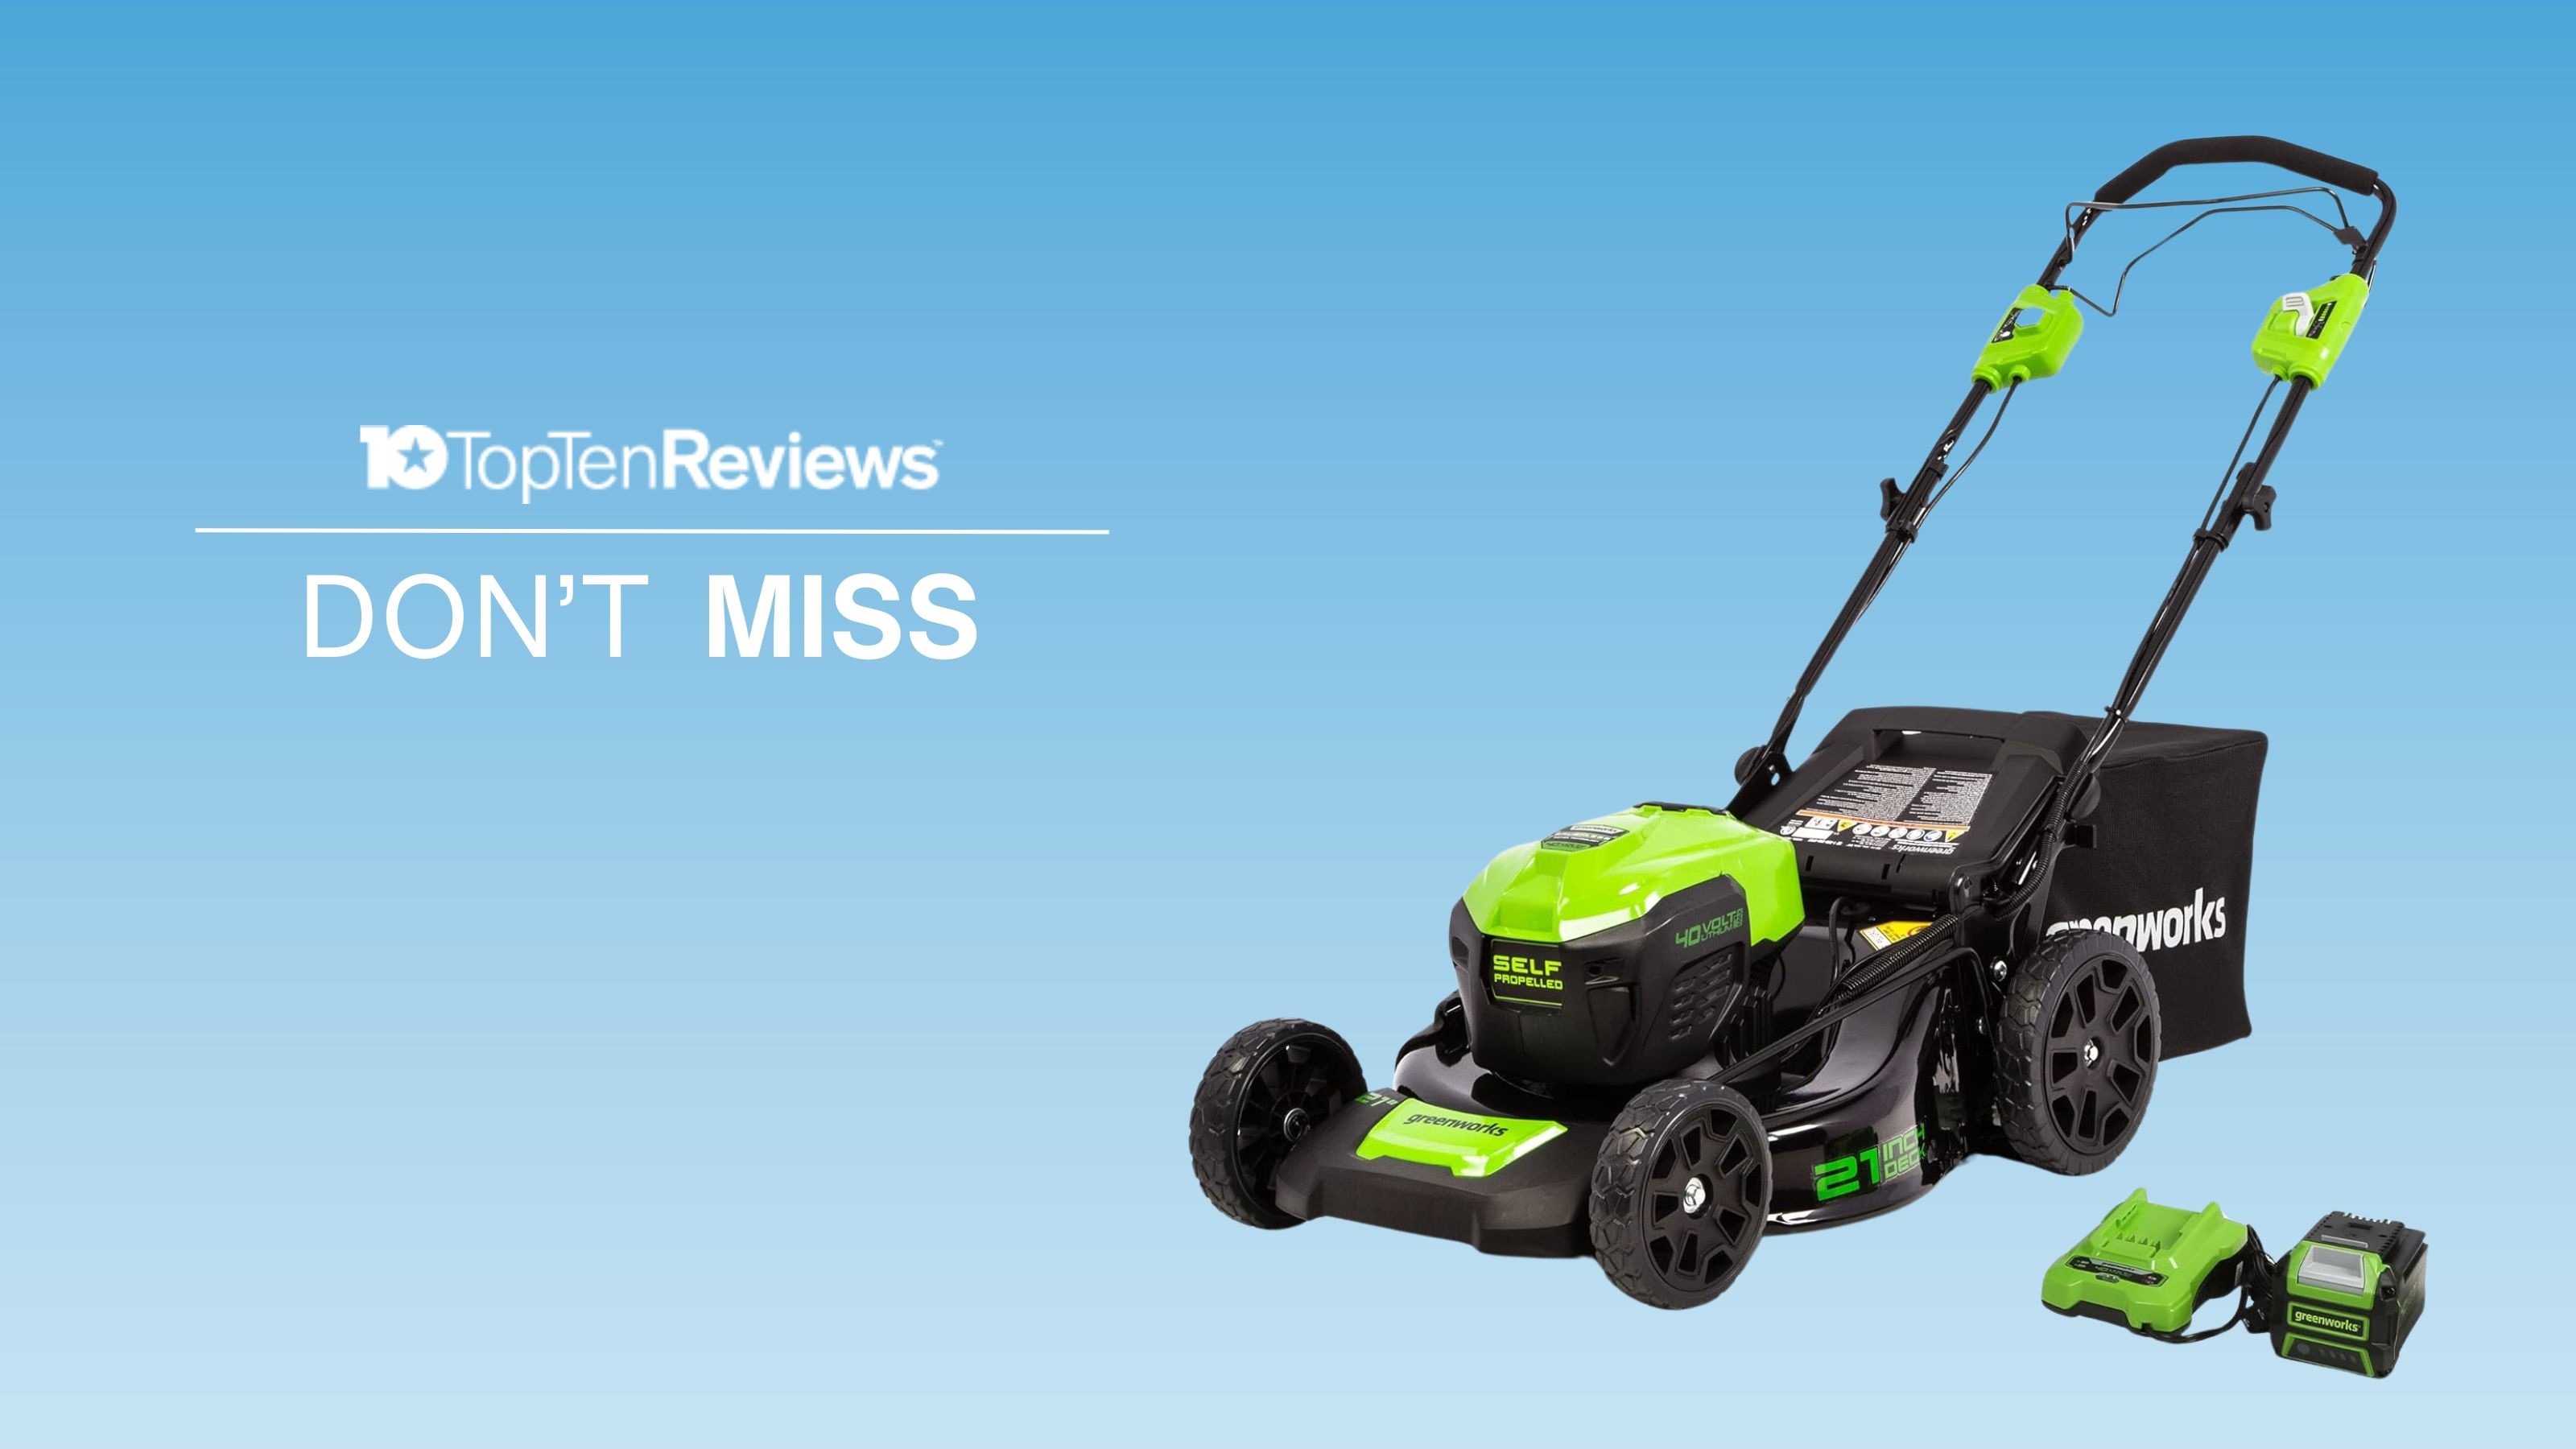 Act now — get this self-propelled lawn mower deal from Amazon for one of it's lowest ever price